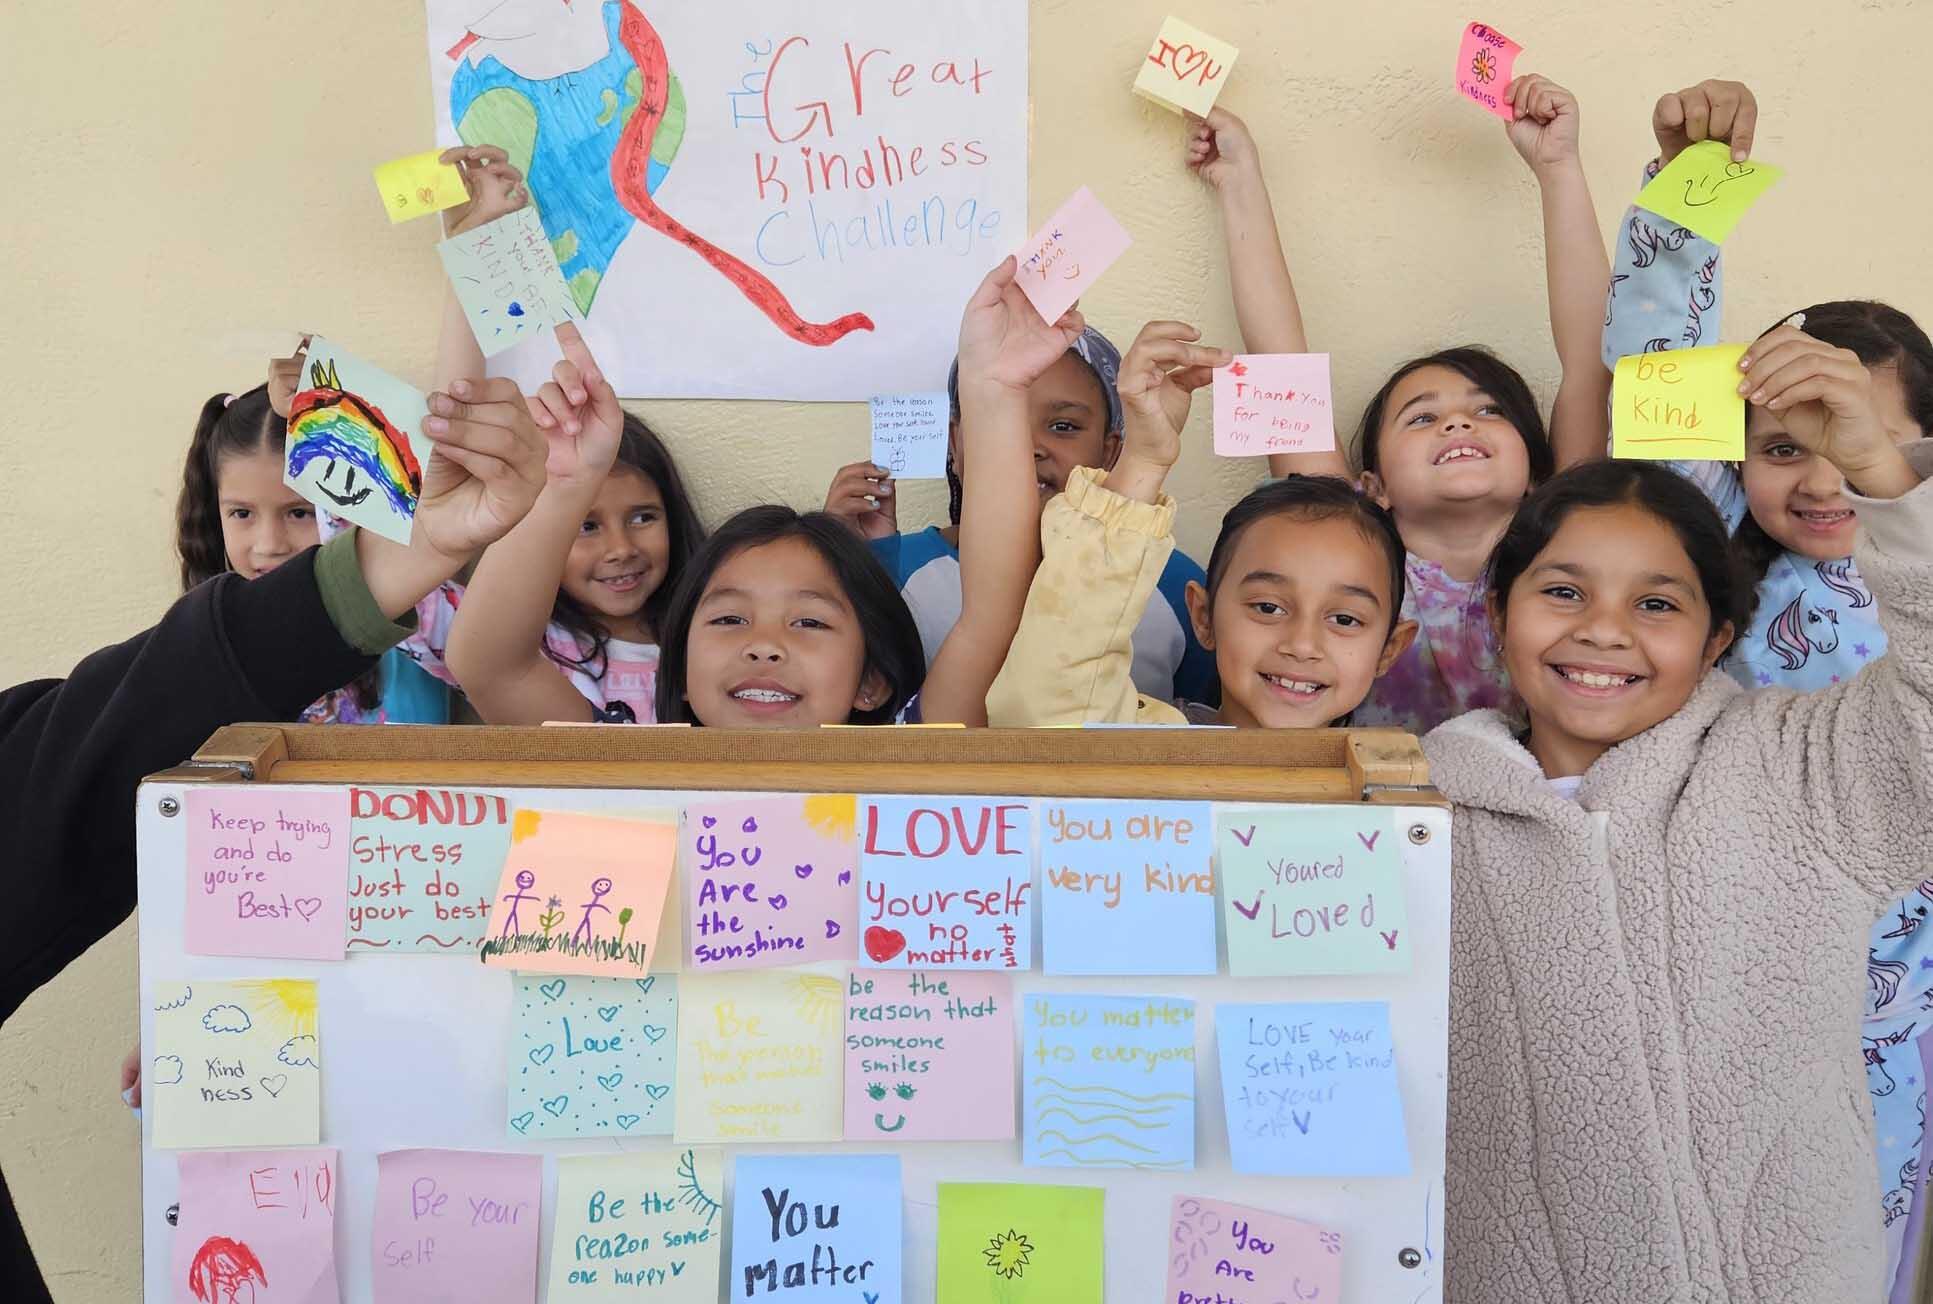 A group of exuberant children holding up colorful handmade notes and drawings in front of a poster that reads 'Great Kindness Challenge.' The children are showing off their messages of kindness and encouragement, with broad smiles on their faces. They stand in front of a bulletin board filled with similar notes, creating a vibrant and positive display in what appears to be a school setting.